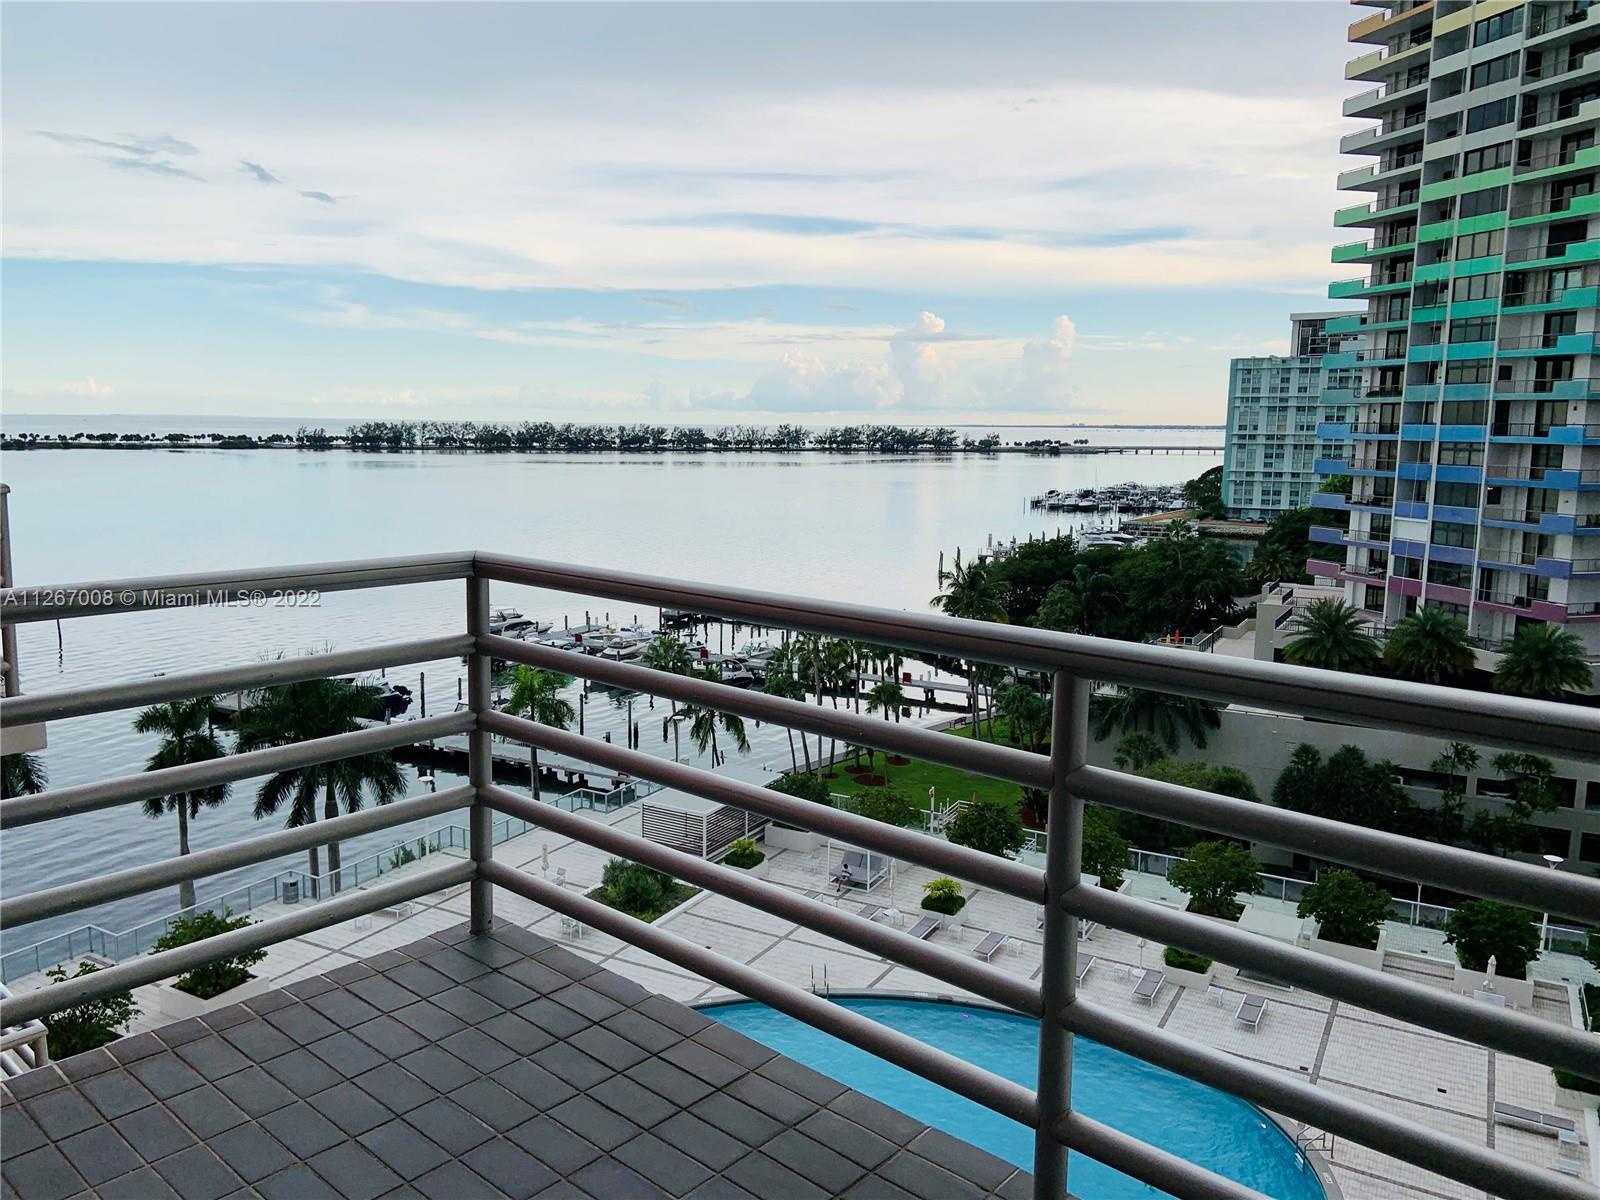 Rarely available and one of the largest 1 bedroom 1.5 baths apartment with an excellent floorpan, gr